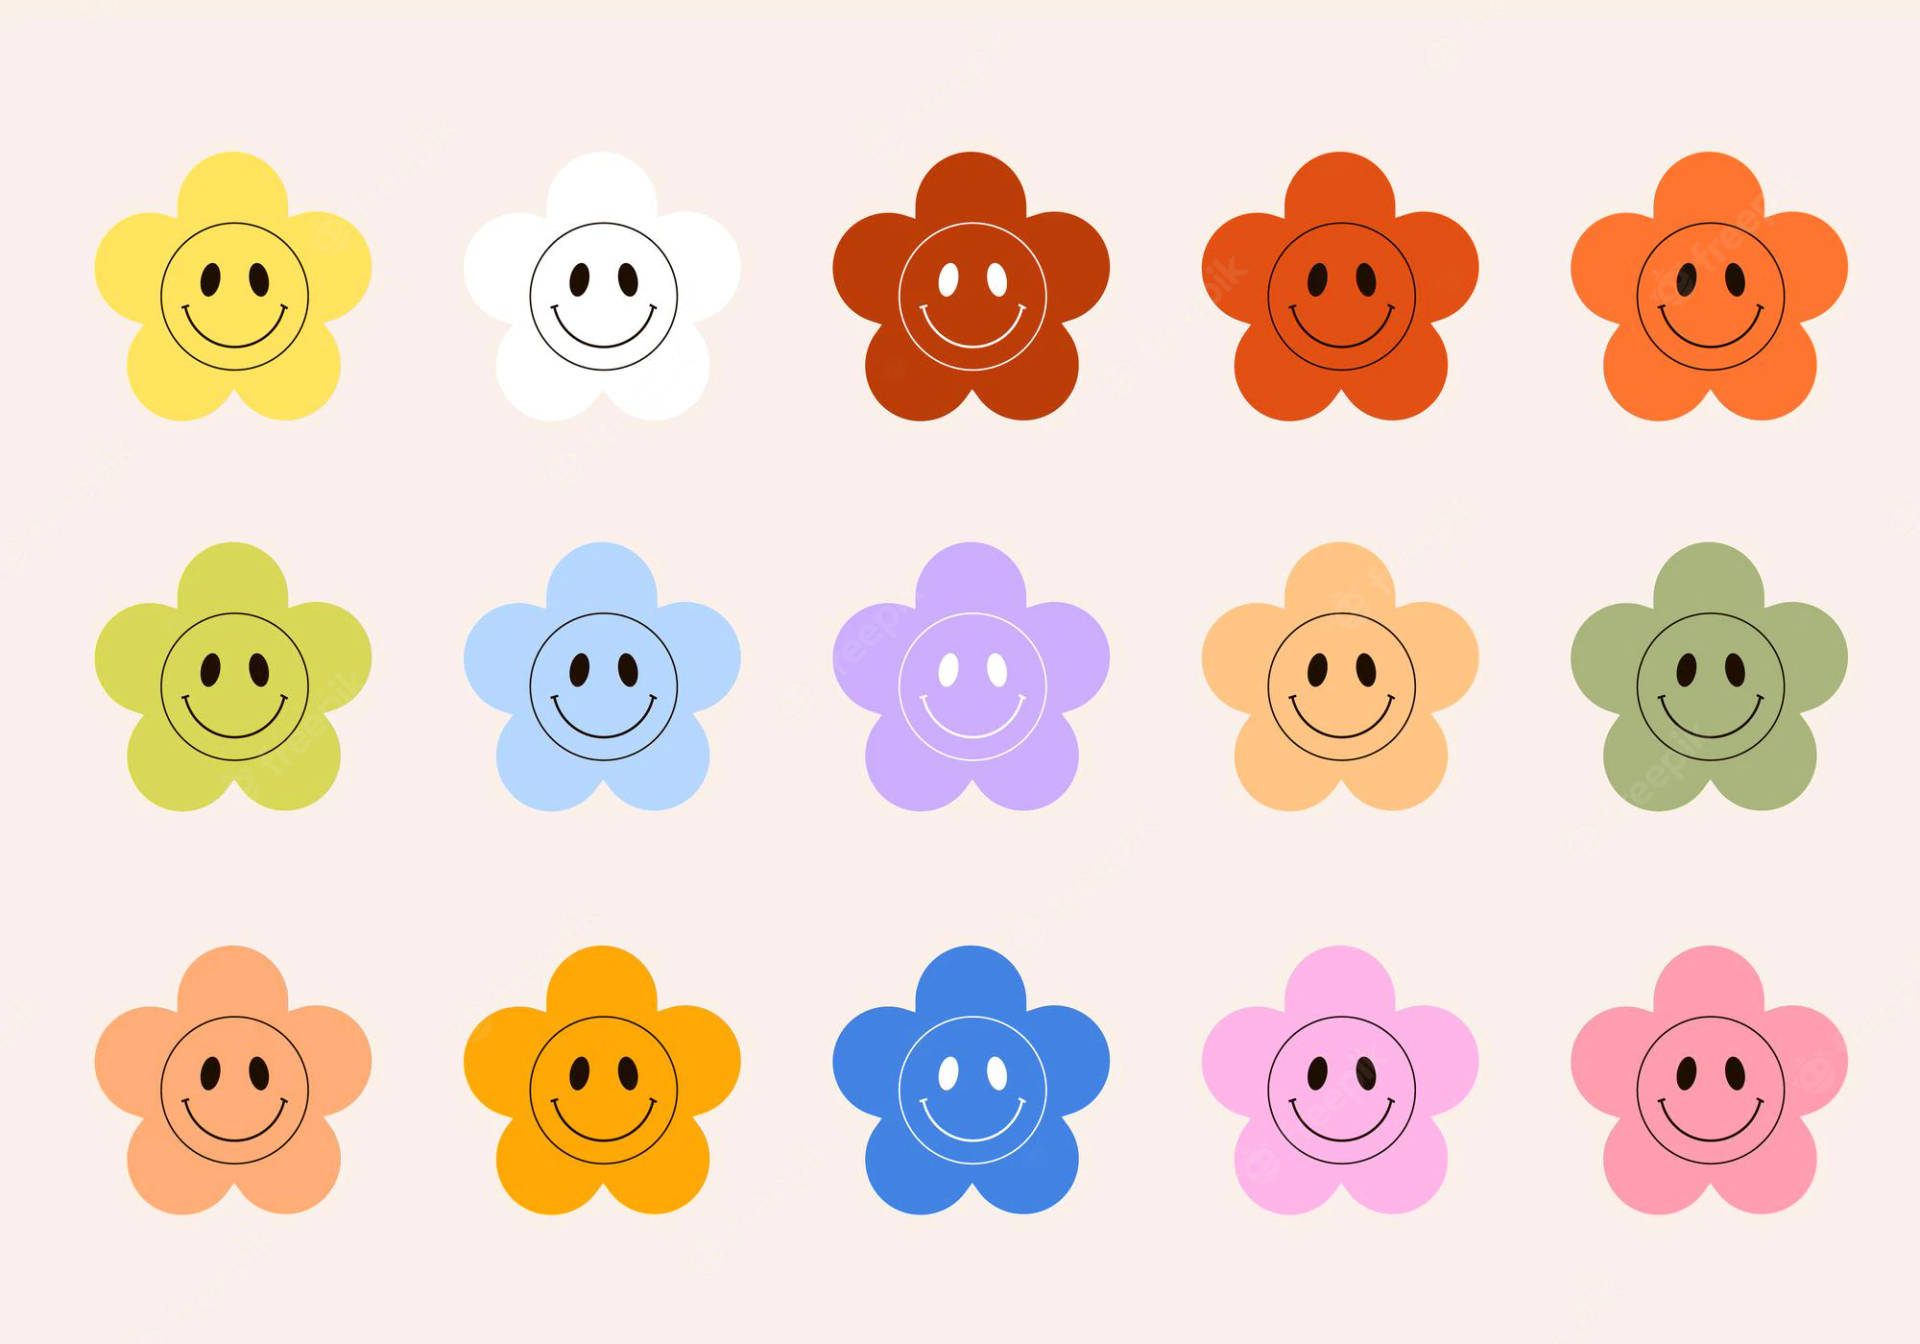 Flower Preppy Smiley Faces Background